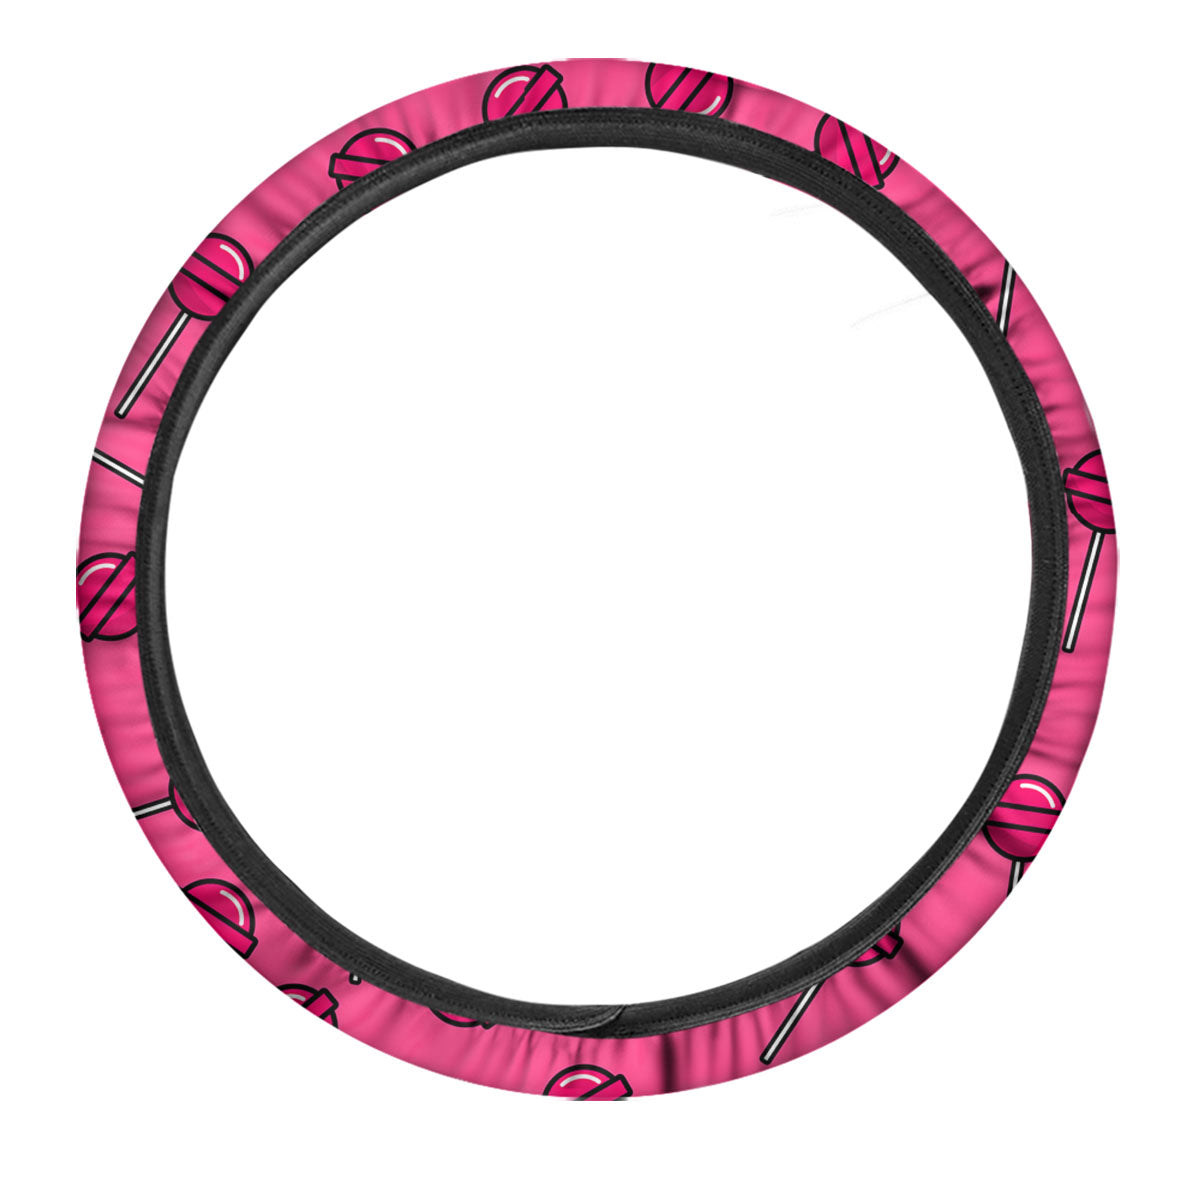 Lollipop Candy Pink Print Pattern Car Steering Wheel Cover-grizzshop